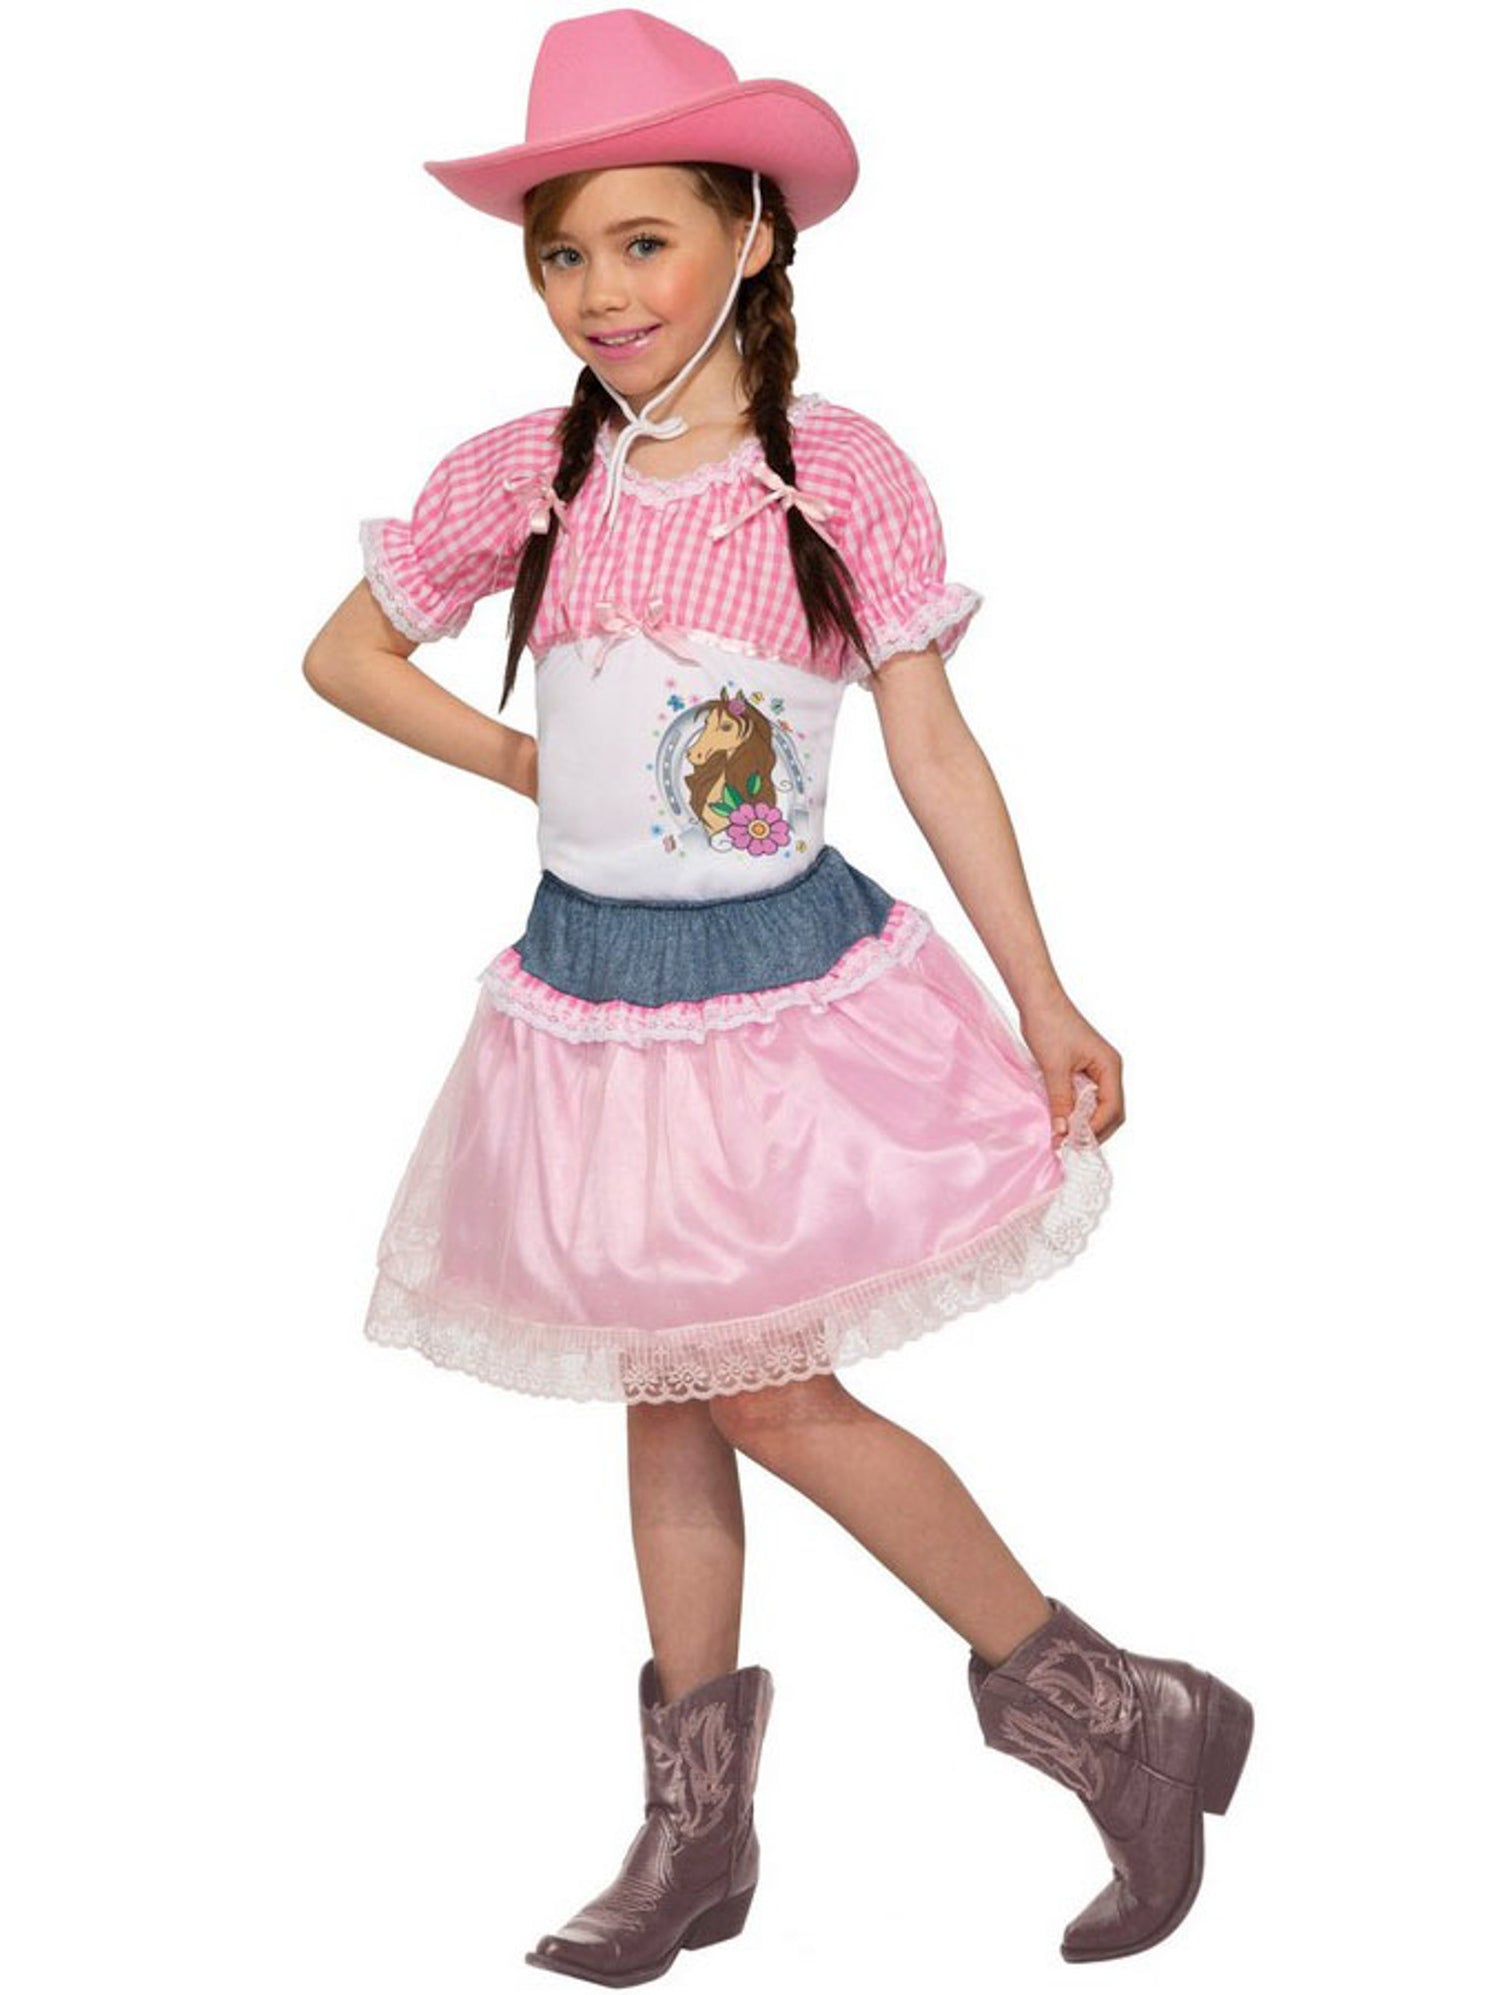 Kid's Pink Cowgirl Costume — Costume Super Center